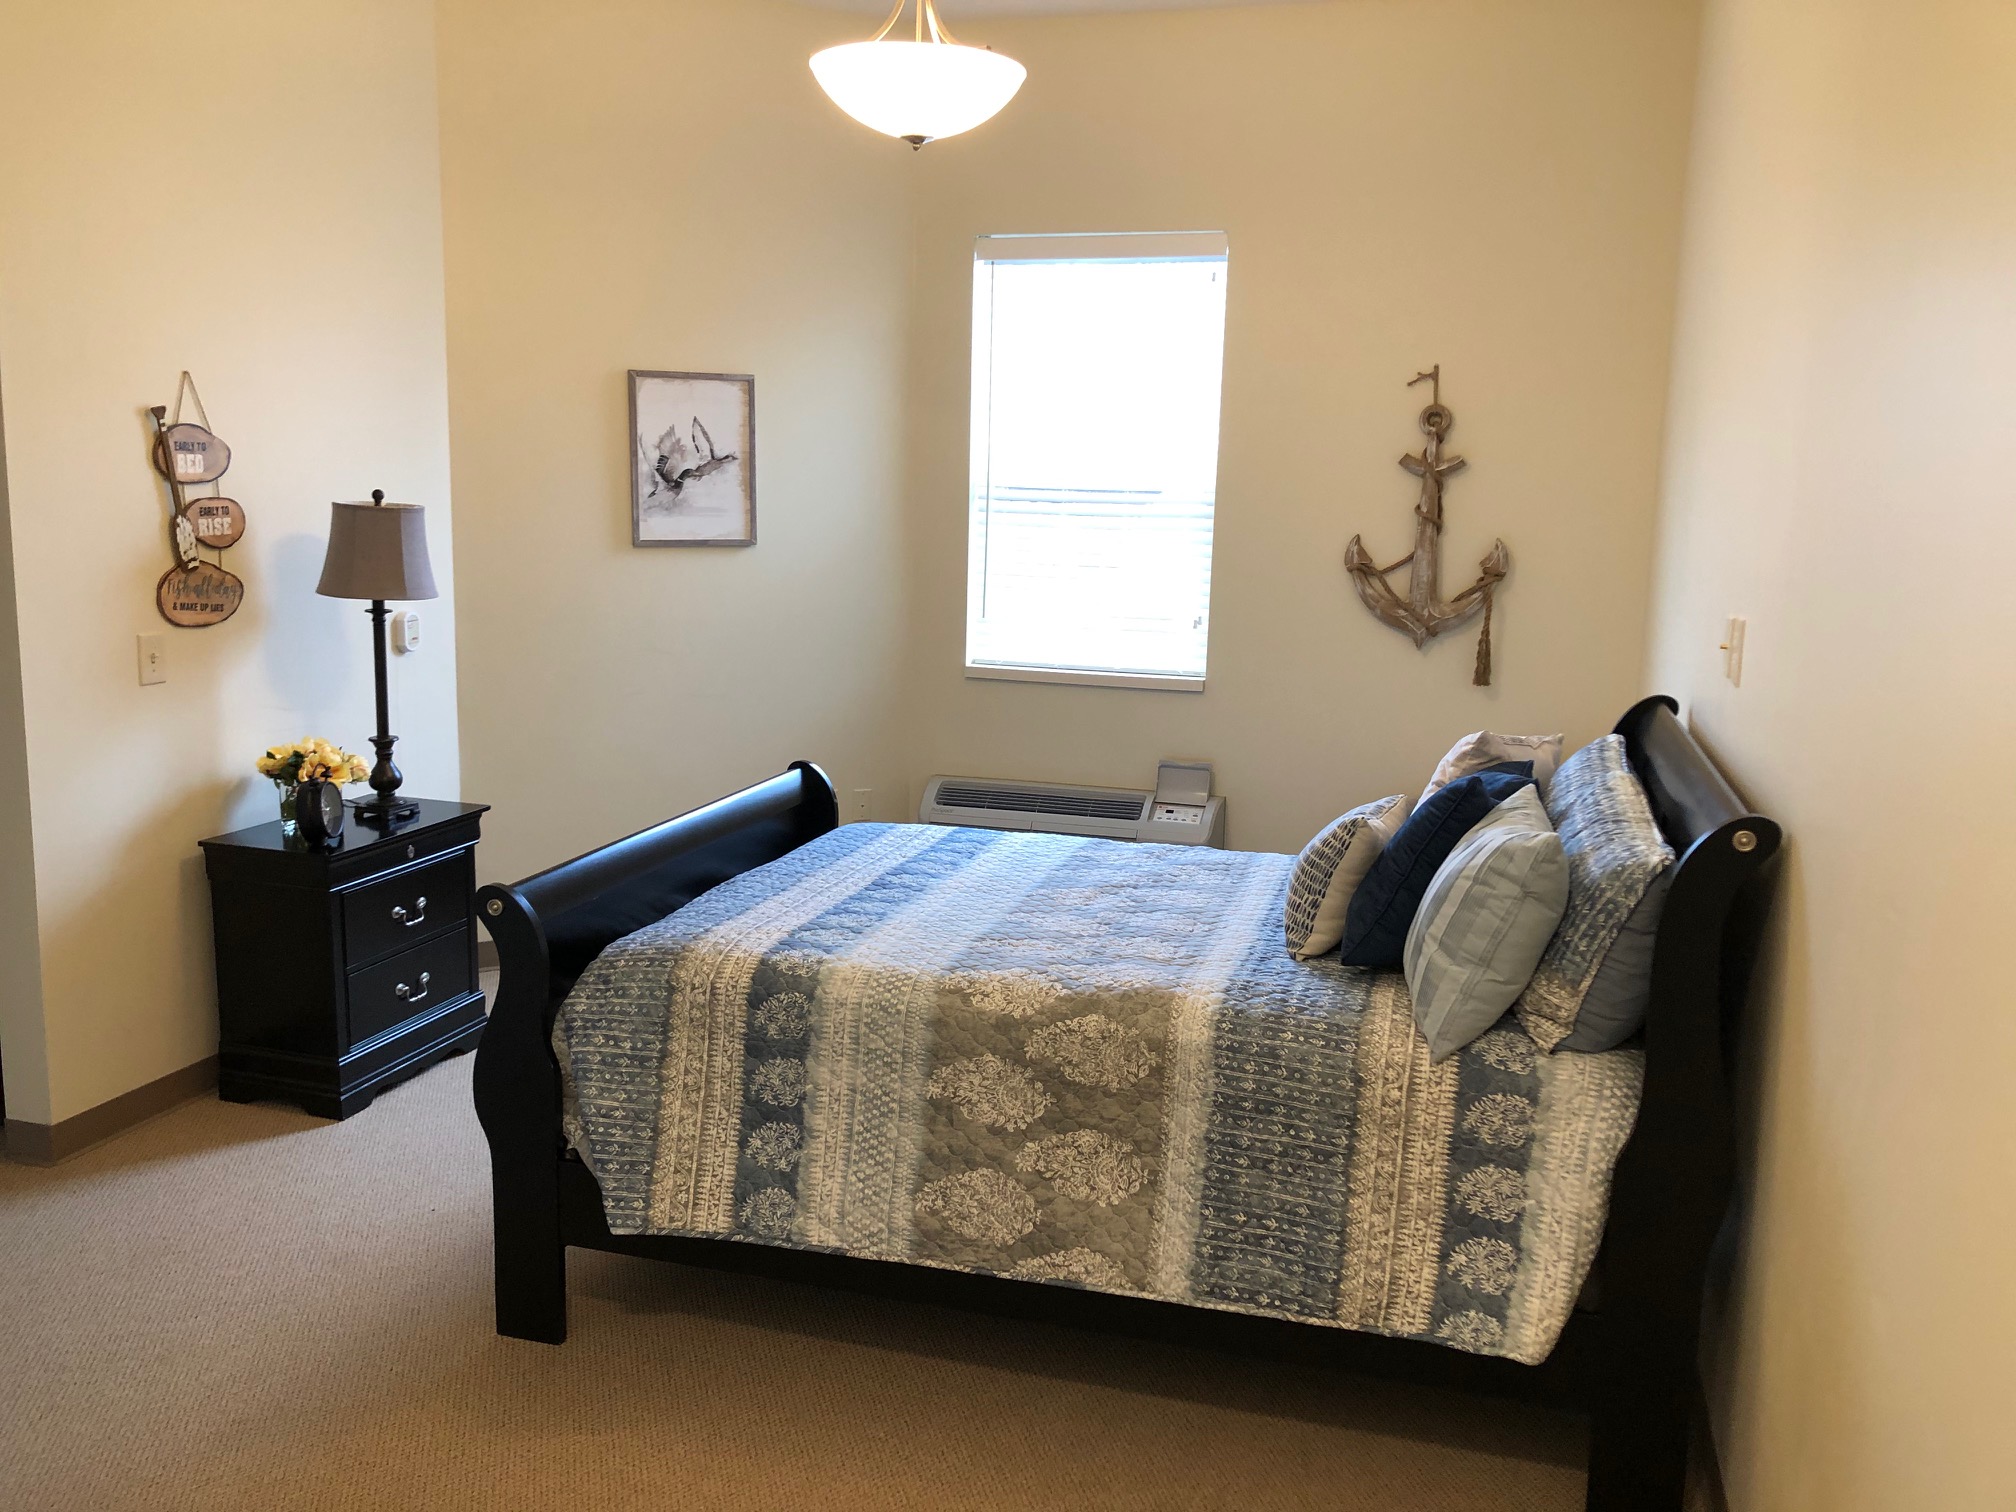 North Woods Village Memory Care Assisted Living of Kalamazoo image